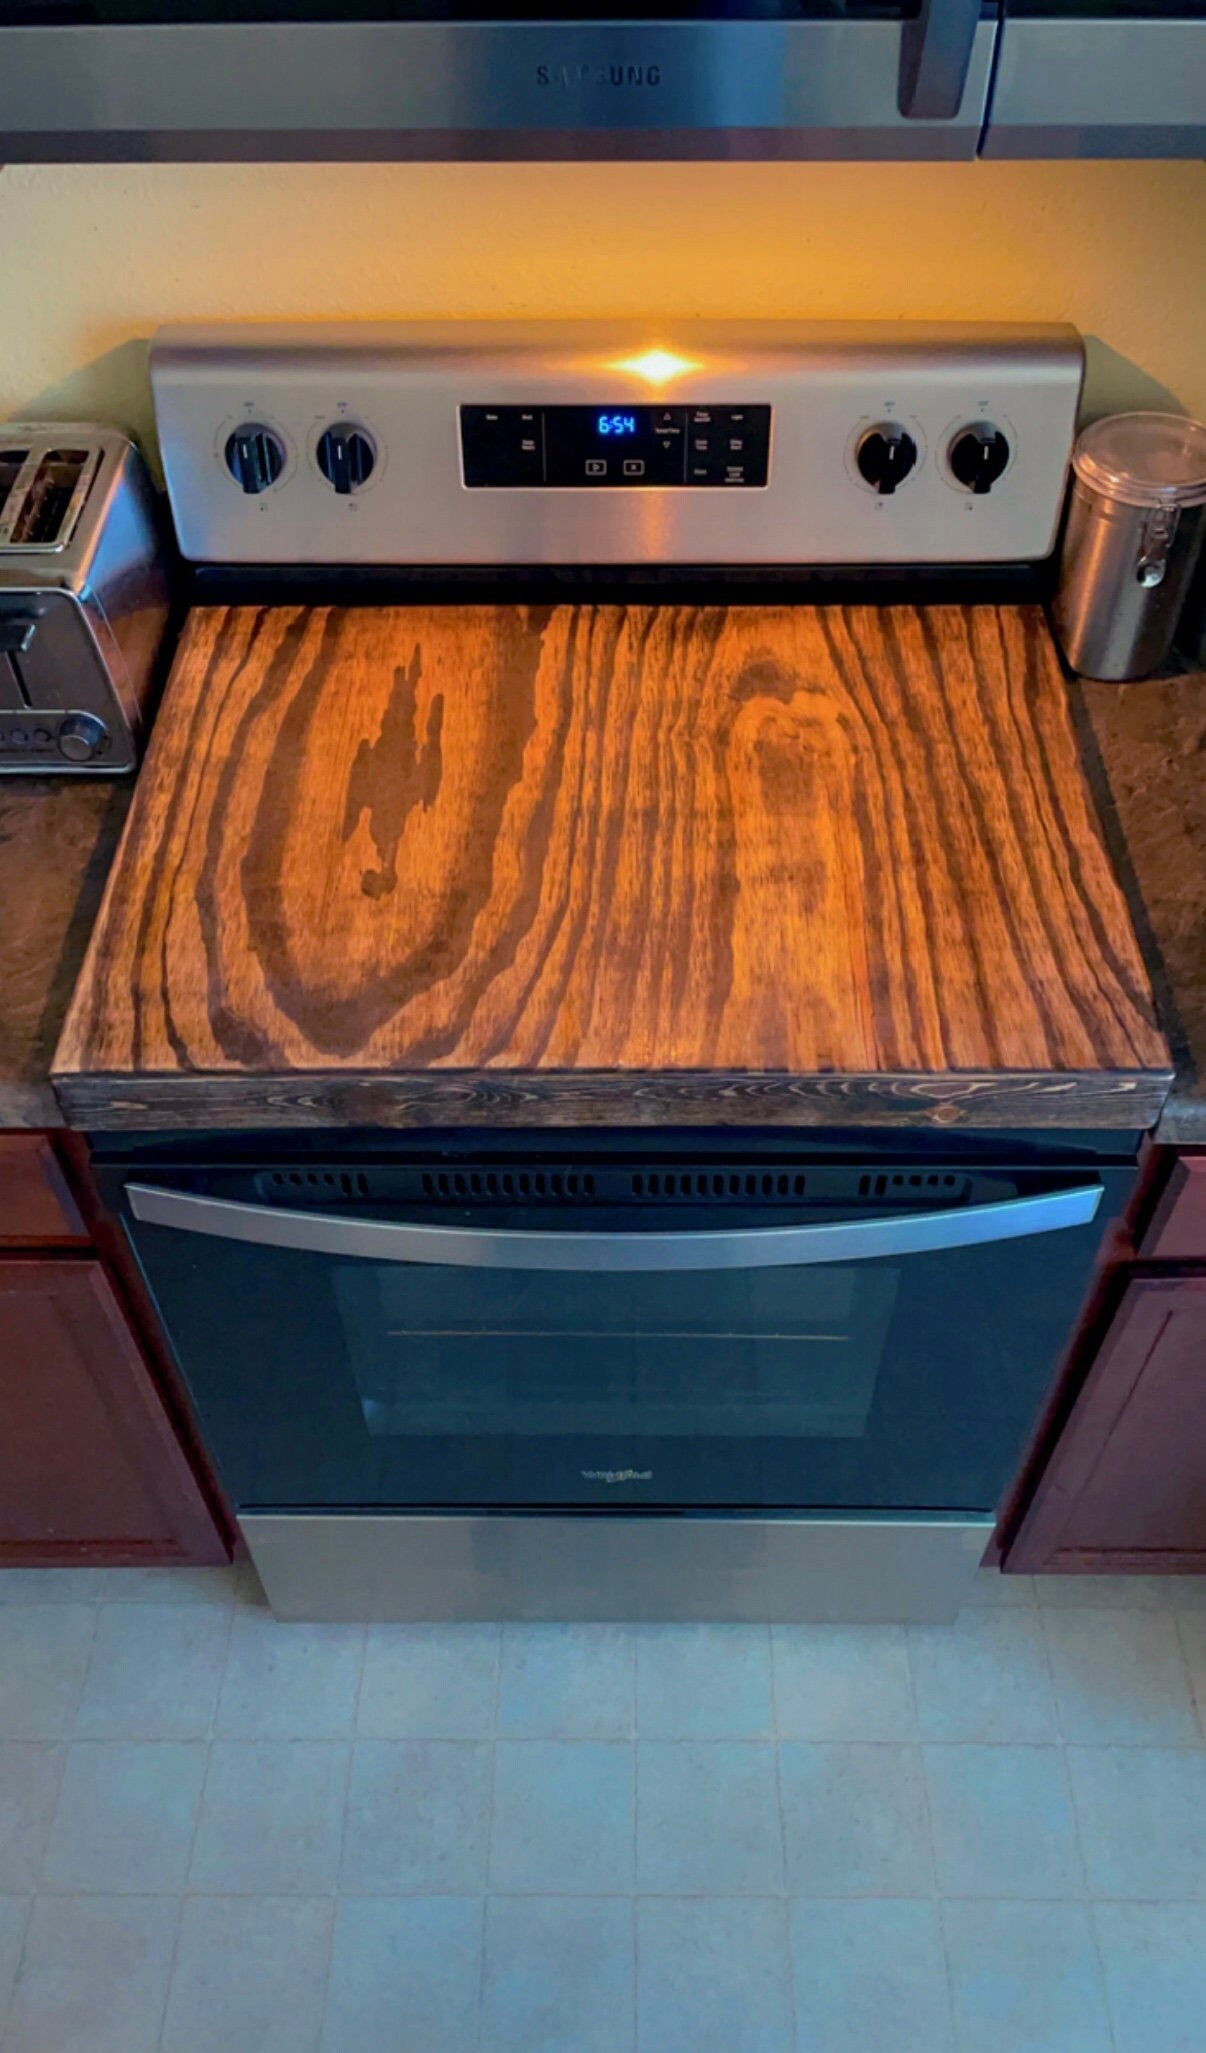 Dual-purpose Bamboo Stovetop cover workspace and Countertop cutting Board  with adjustable legs - Cutting Boards, Facebook Marketplace